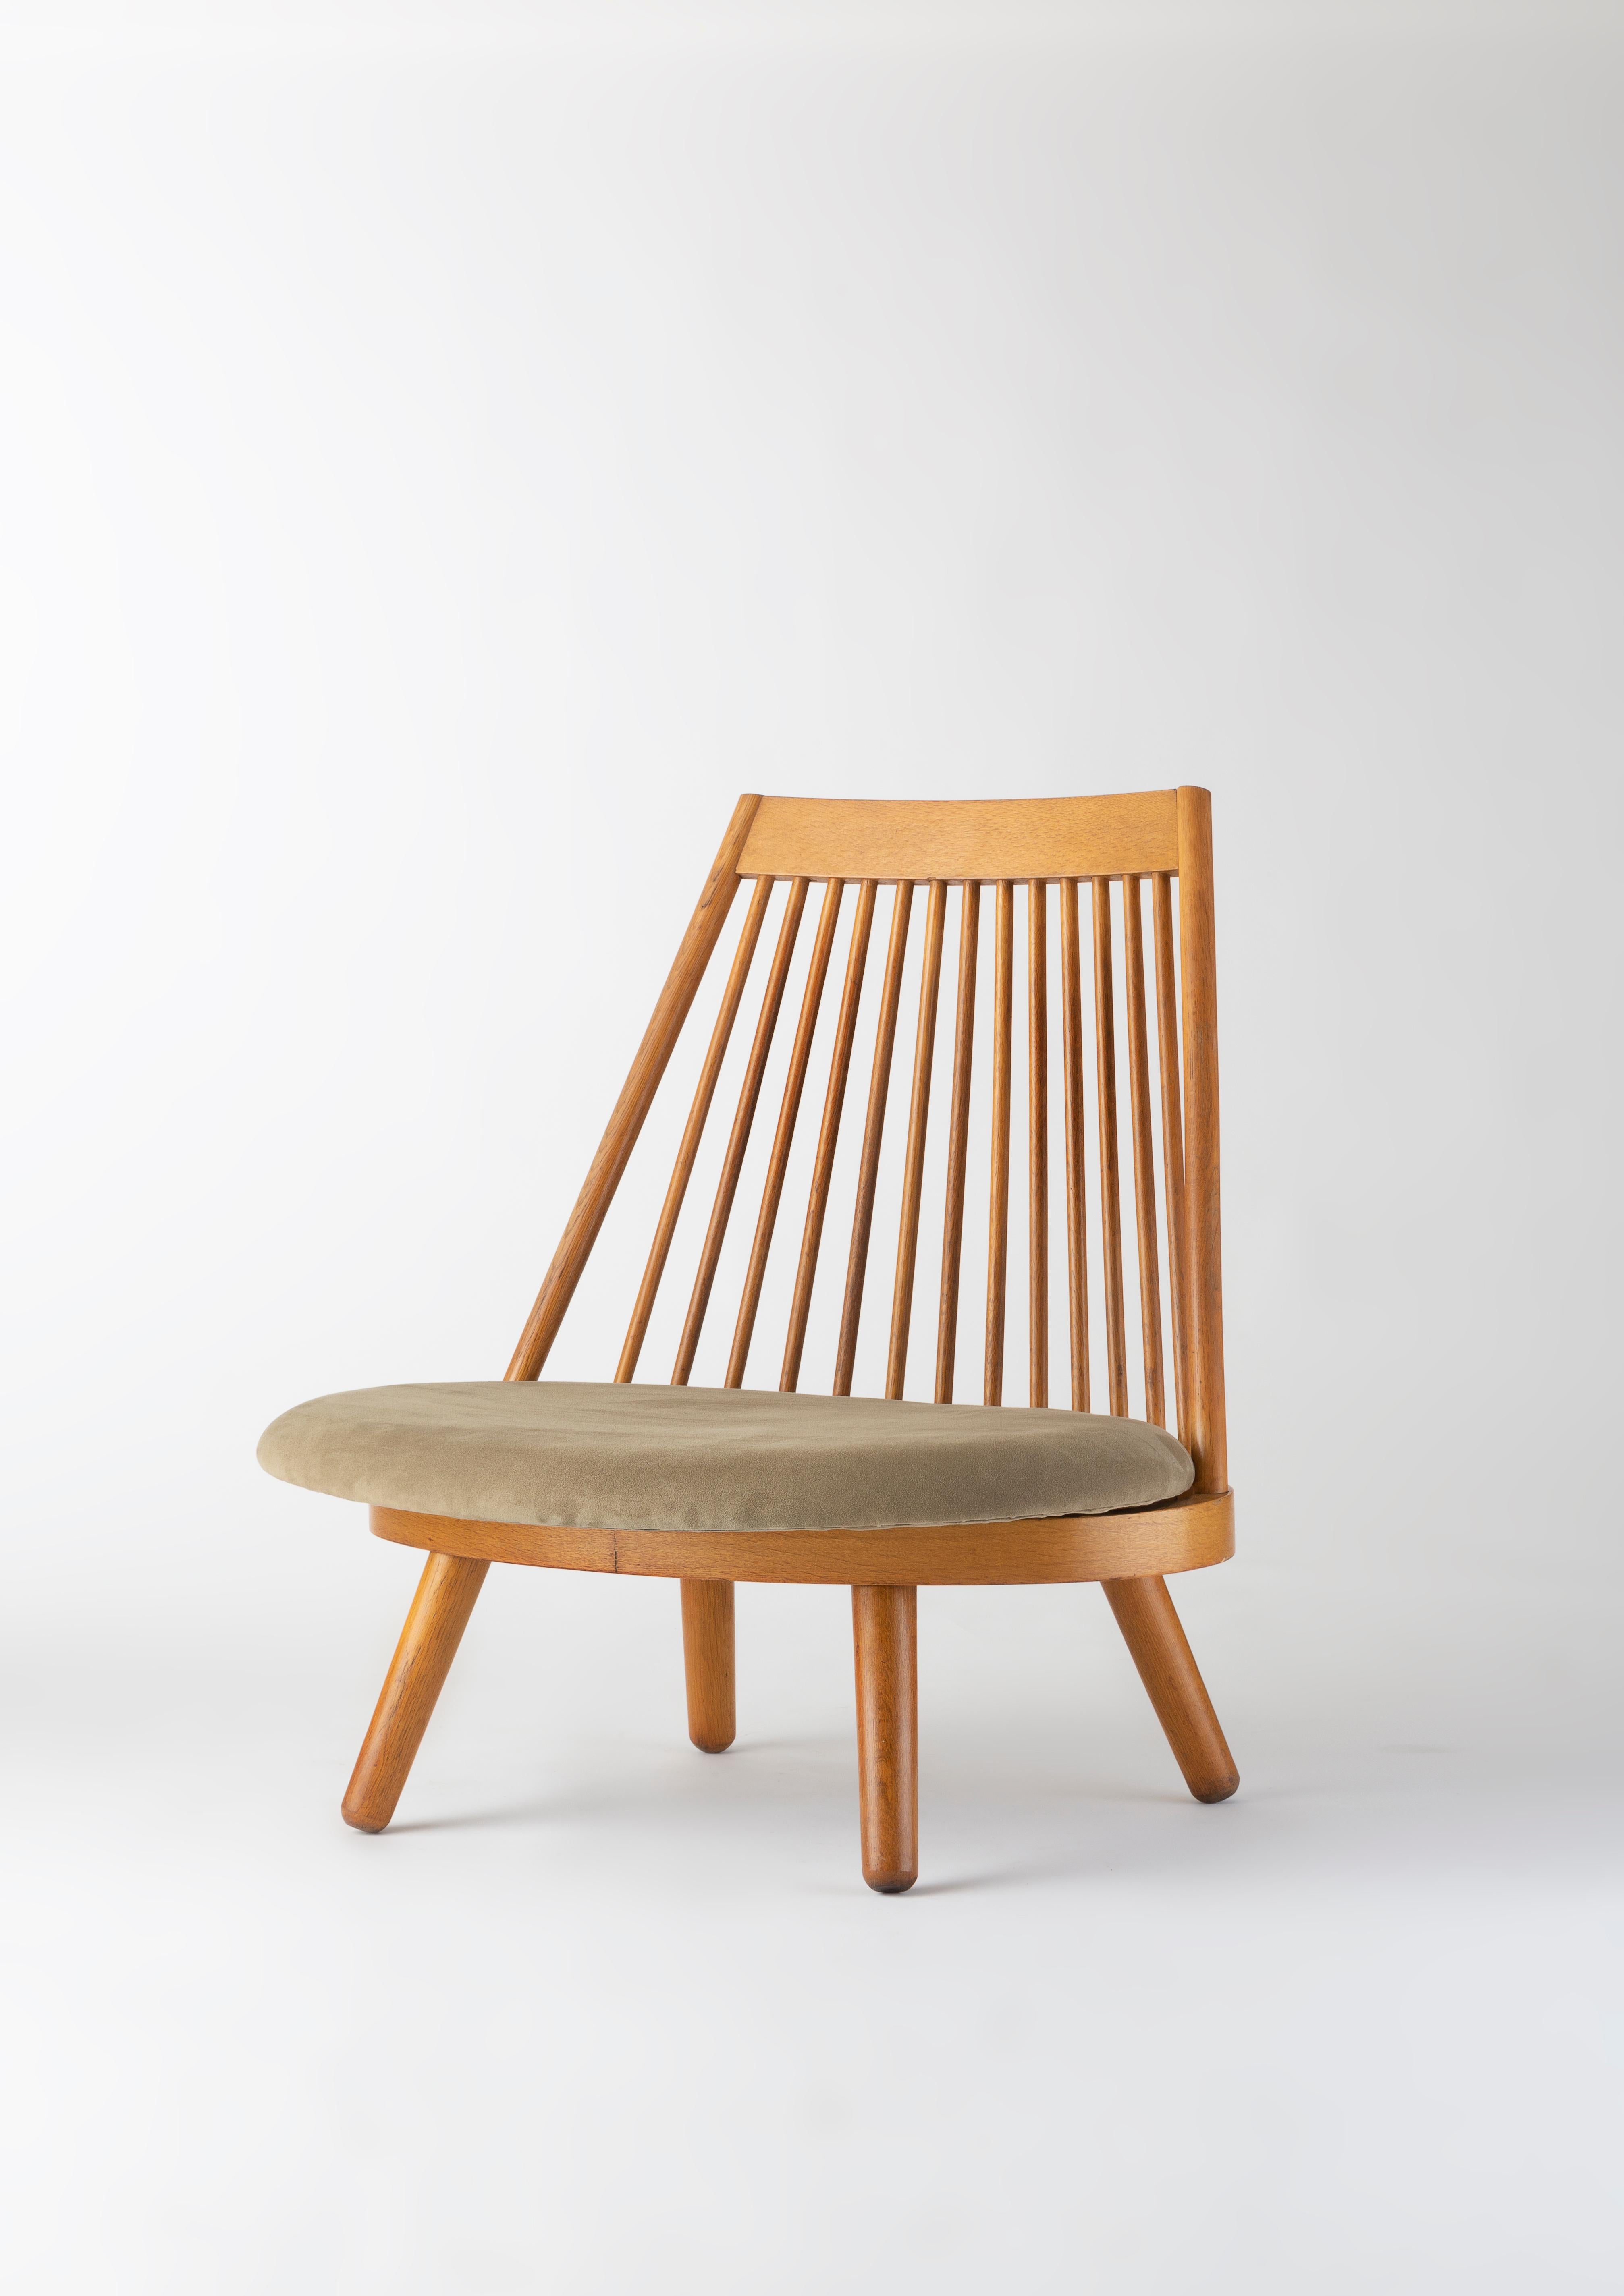 A large easy chair with spokes, known as the “Spoke Chair” by the Japanese designer Katsuhei Toyoguchi, in oak & fabric, manufactured by Tendo Mokko, Japan, the model designed in 1963
A very rare first edition.
 